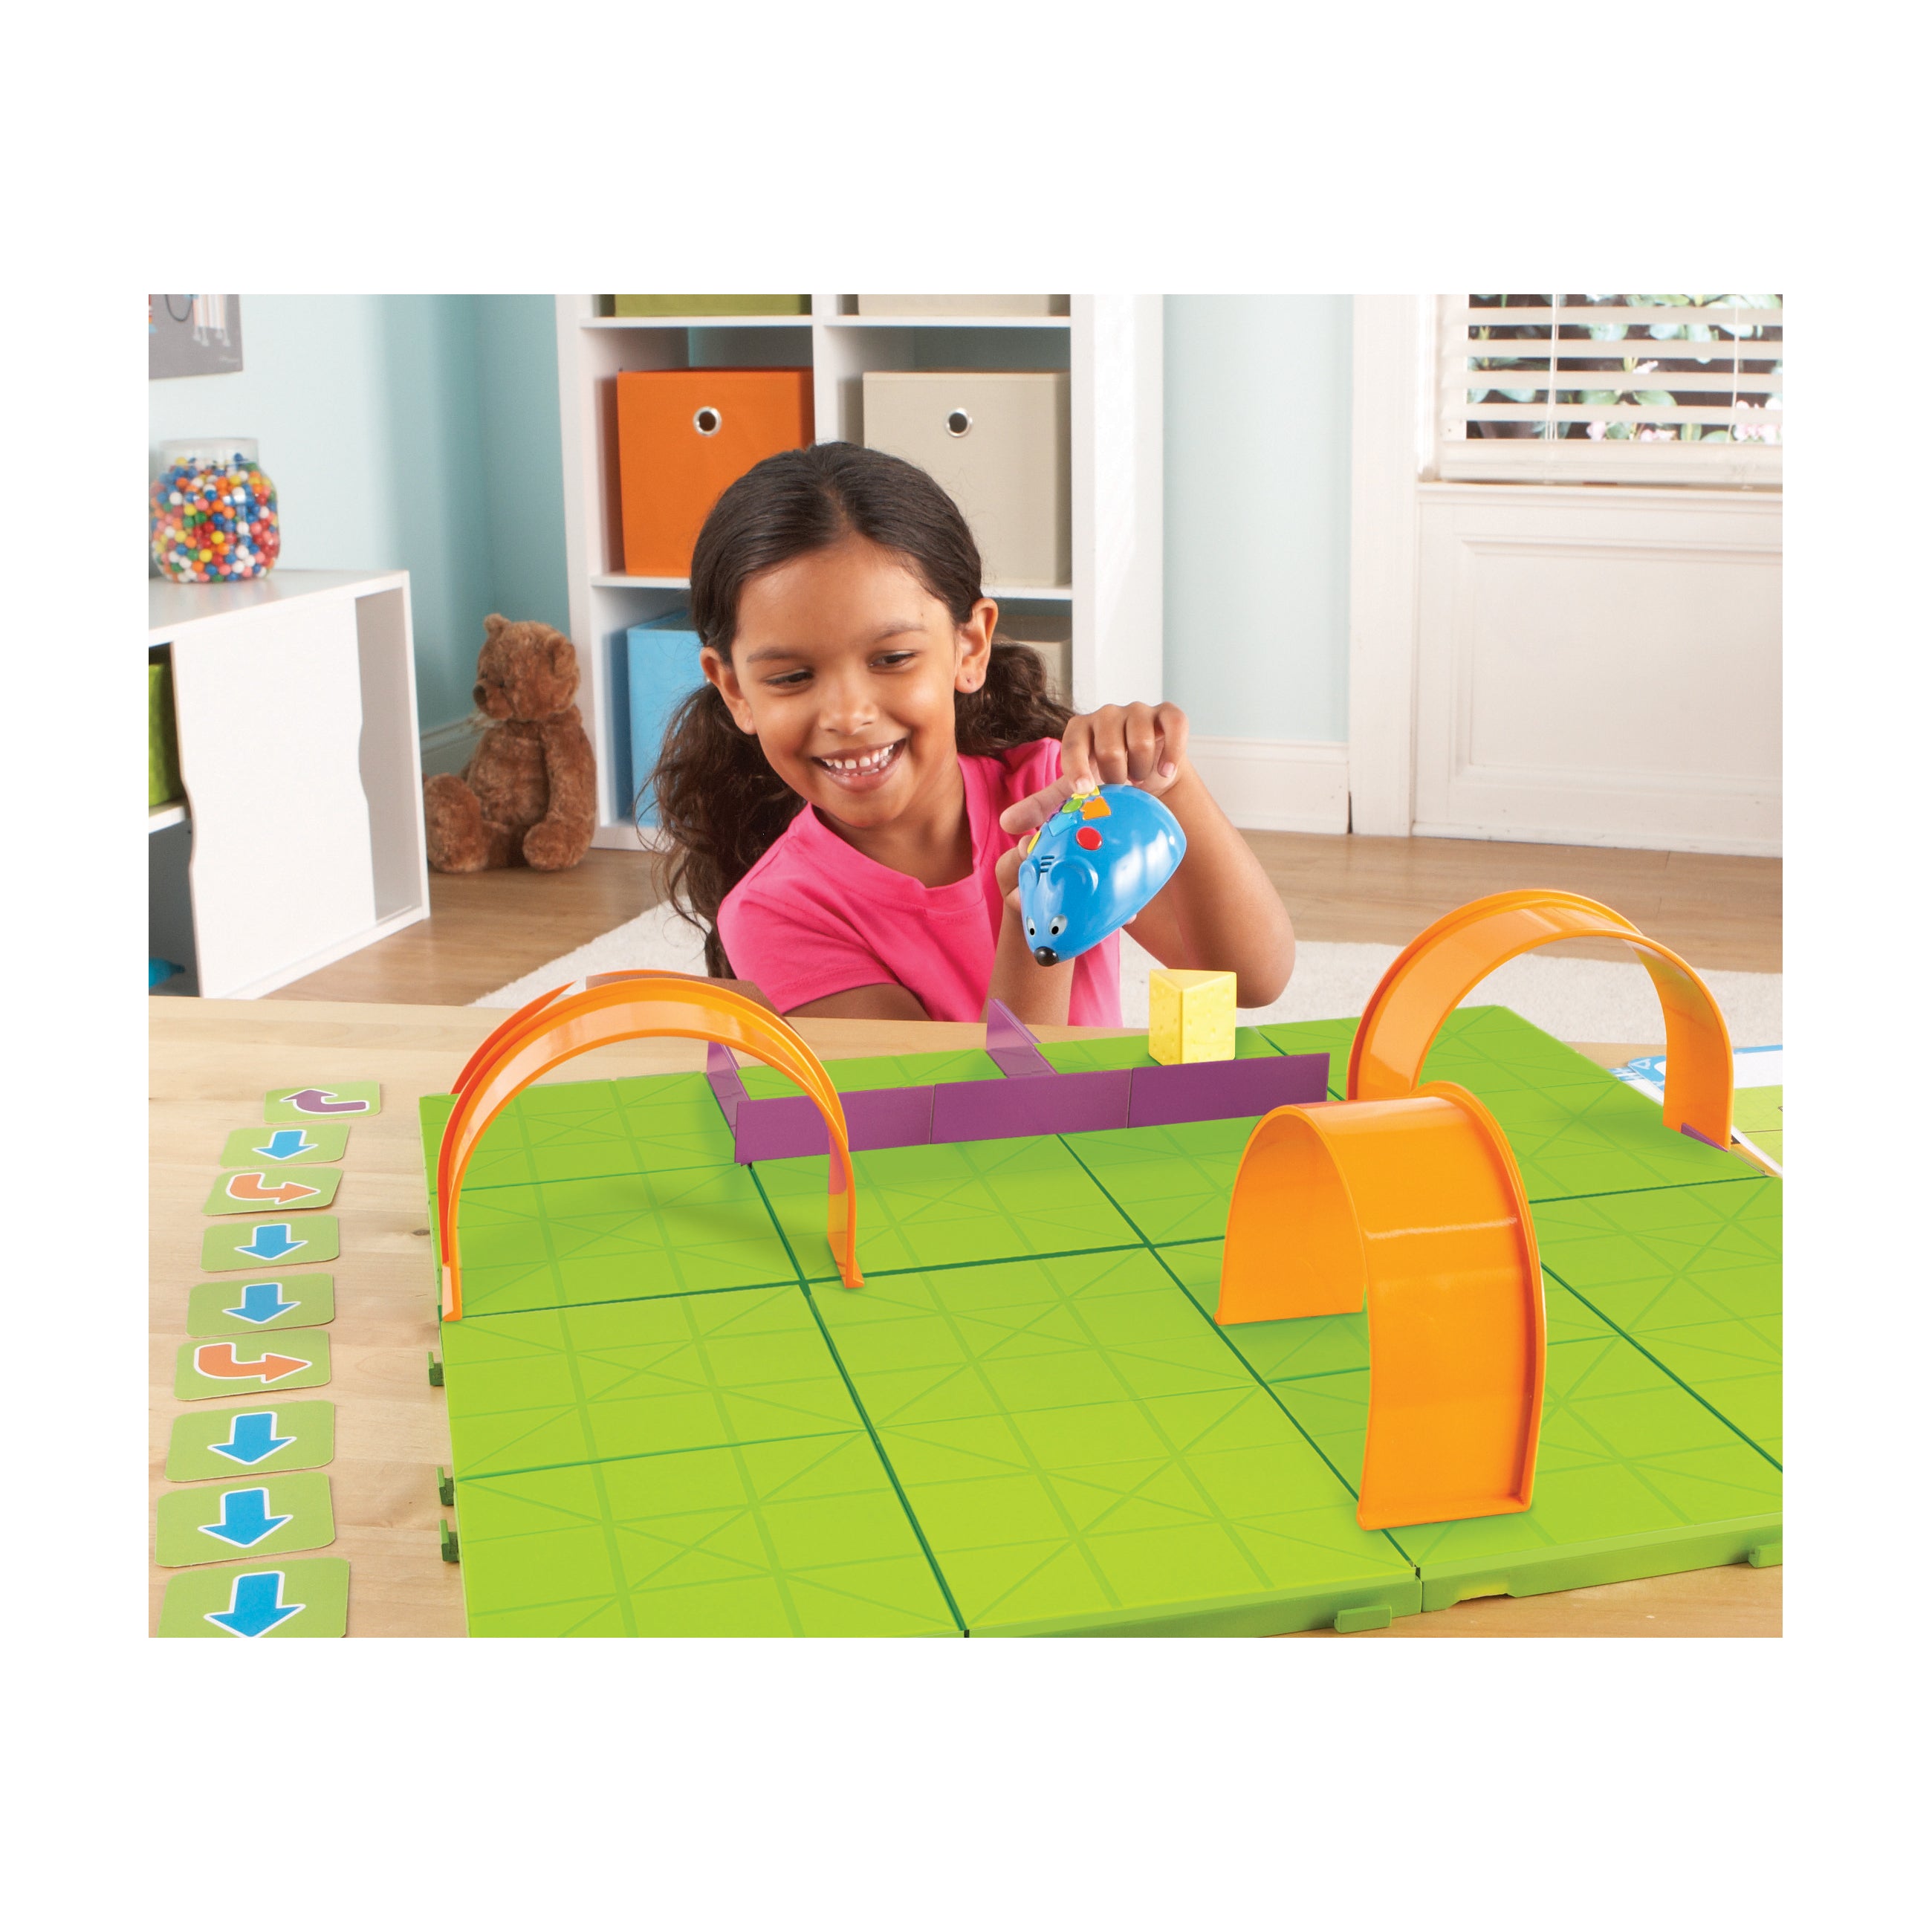 Learning Essentials - Code Mouse Activity Set | AreYouGame – AreYouGame.com